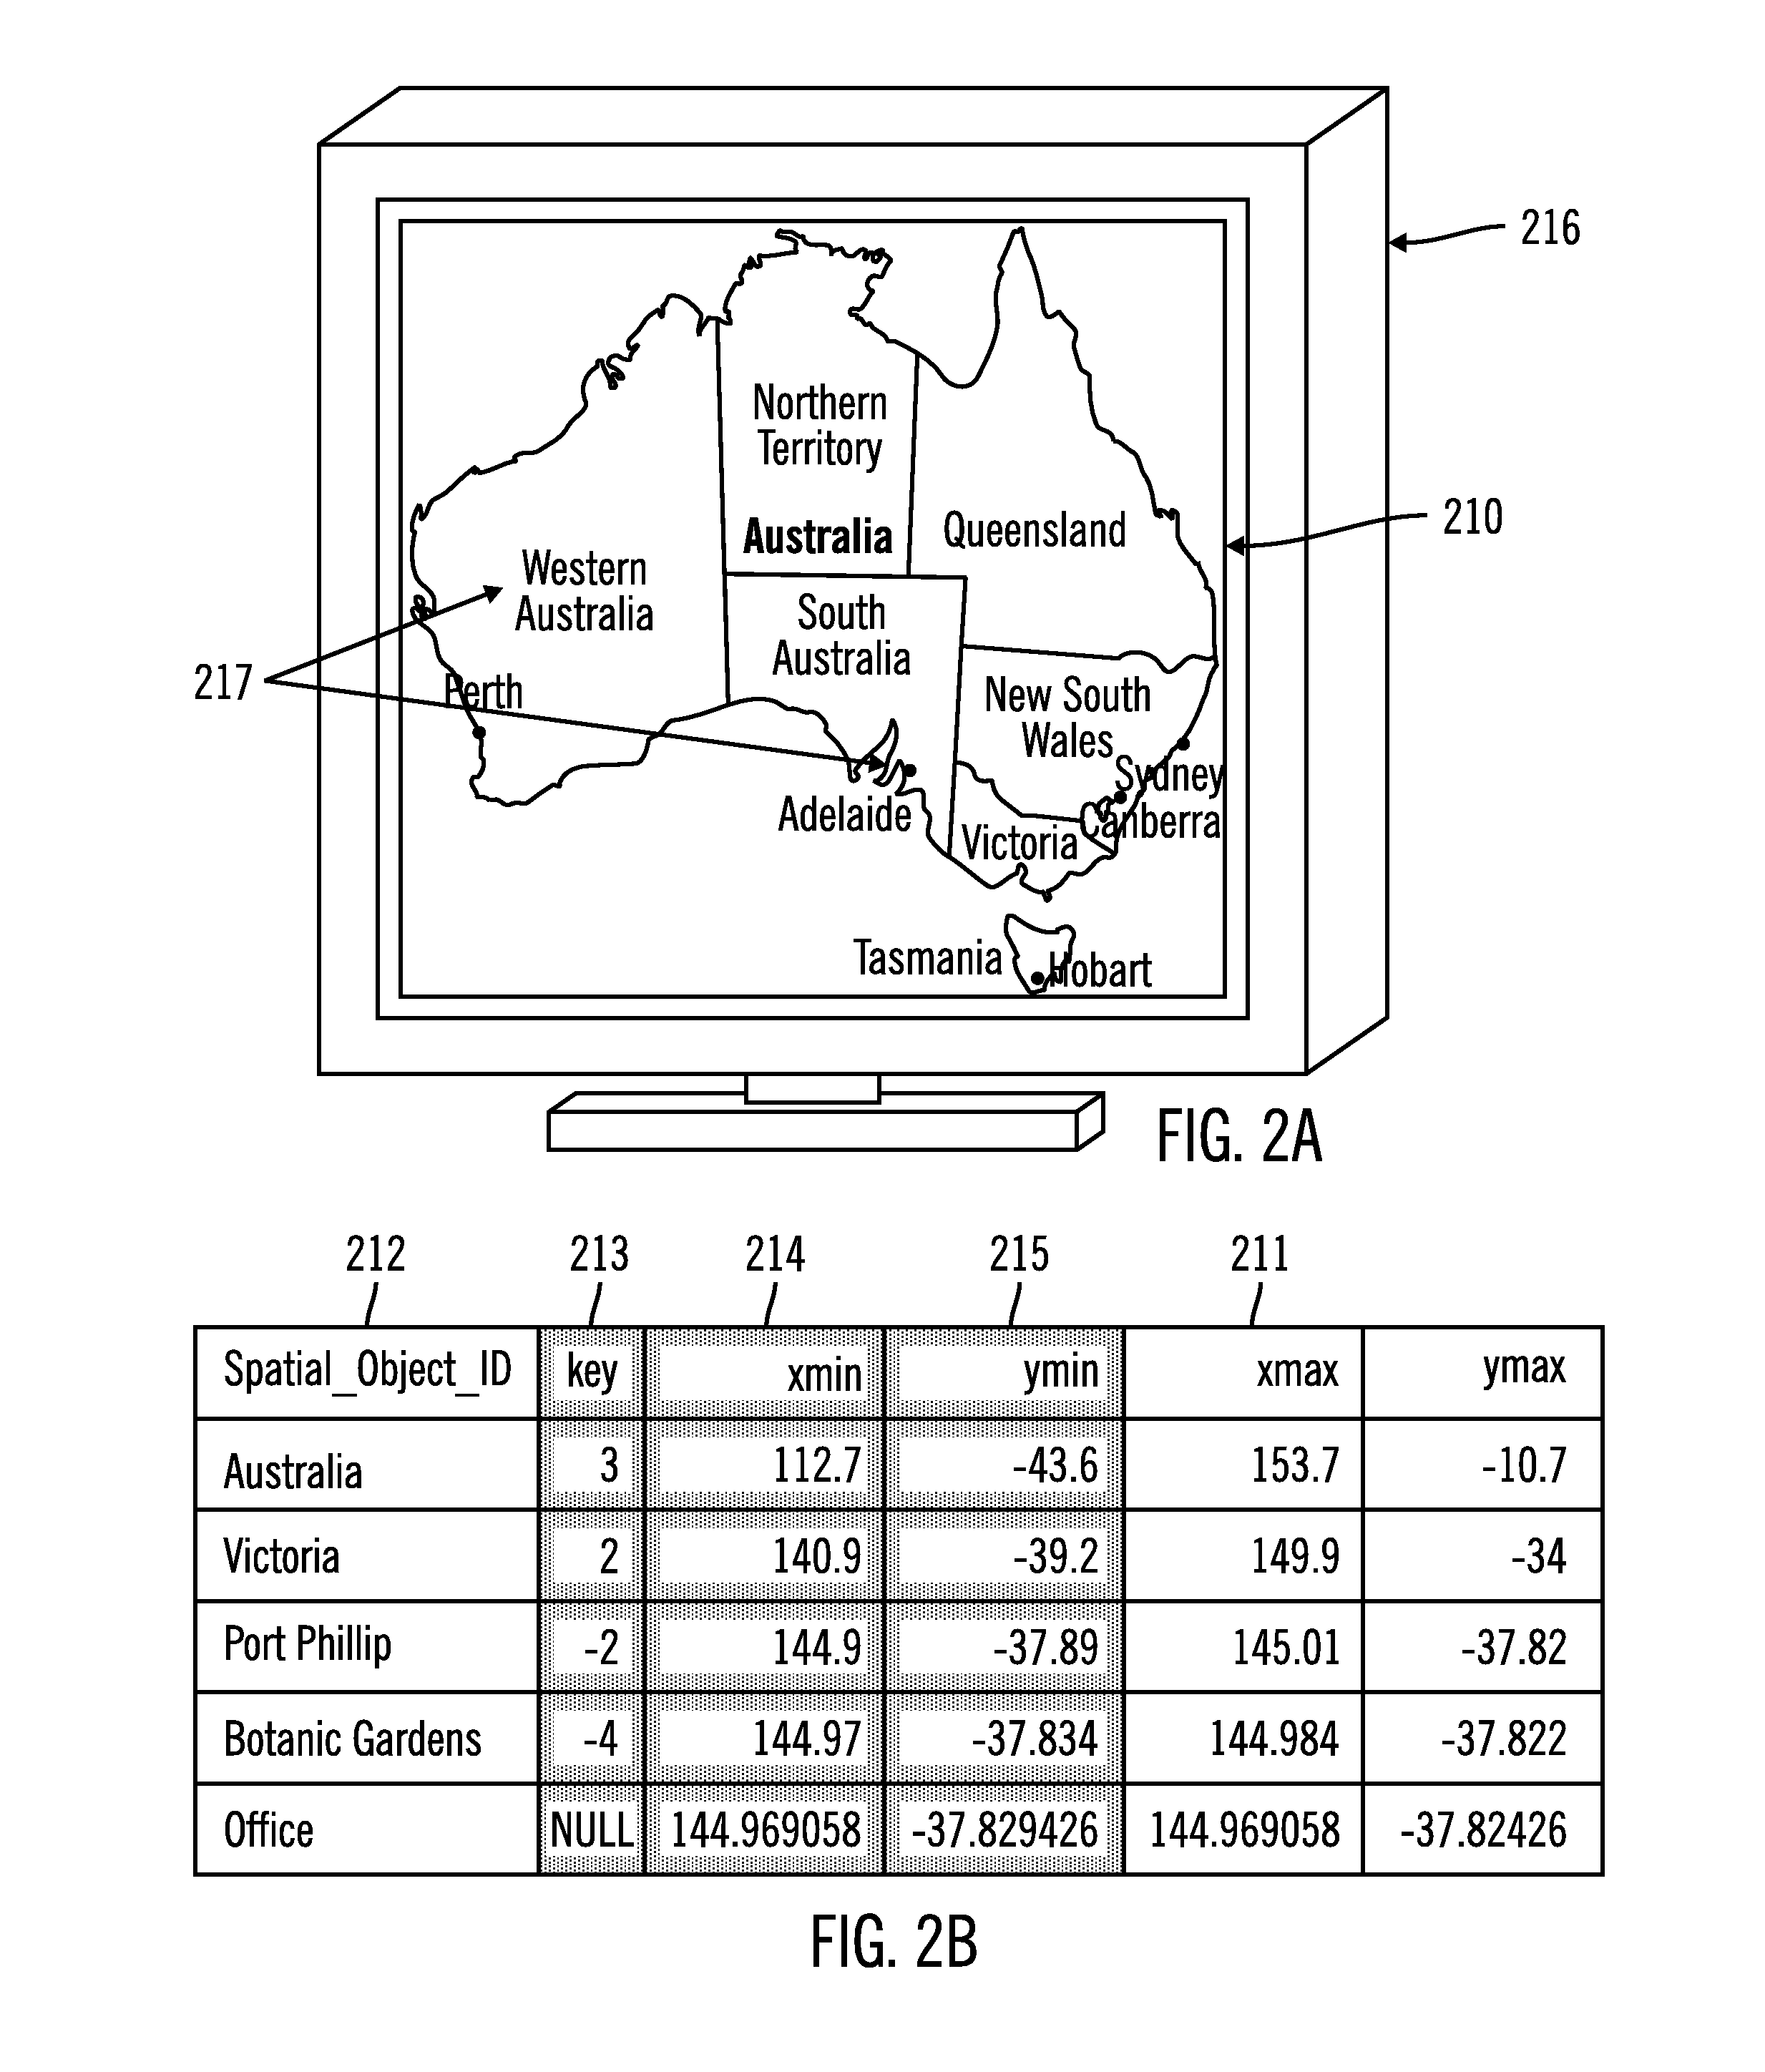 Method, System, and Product for Managing Spatial Data in a Database